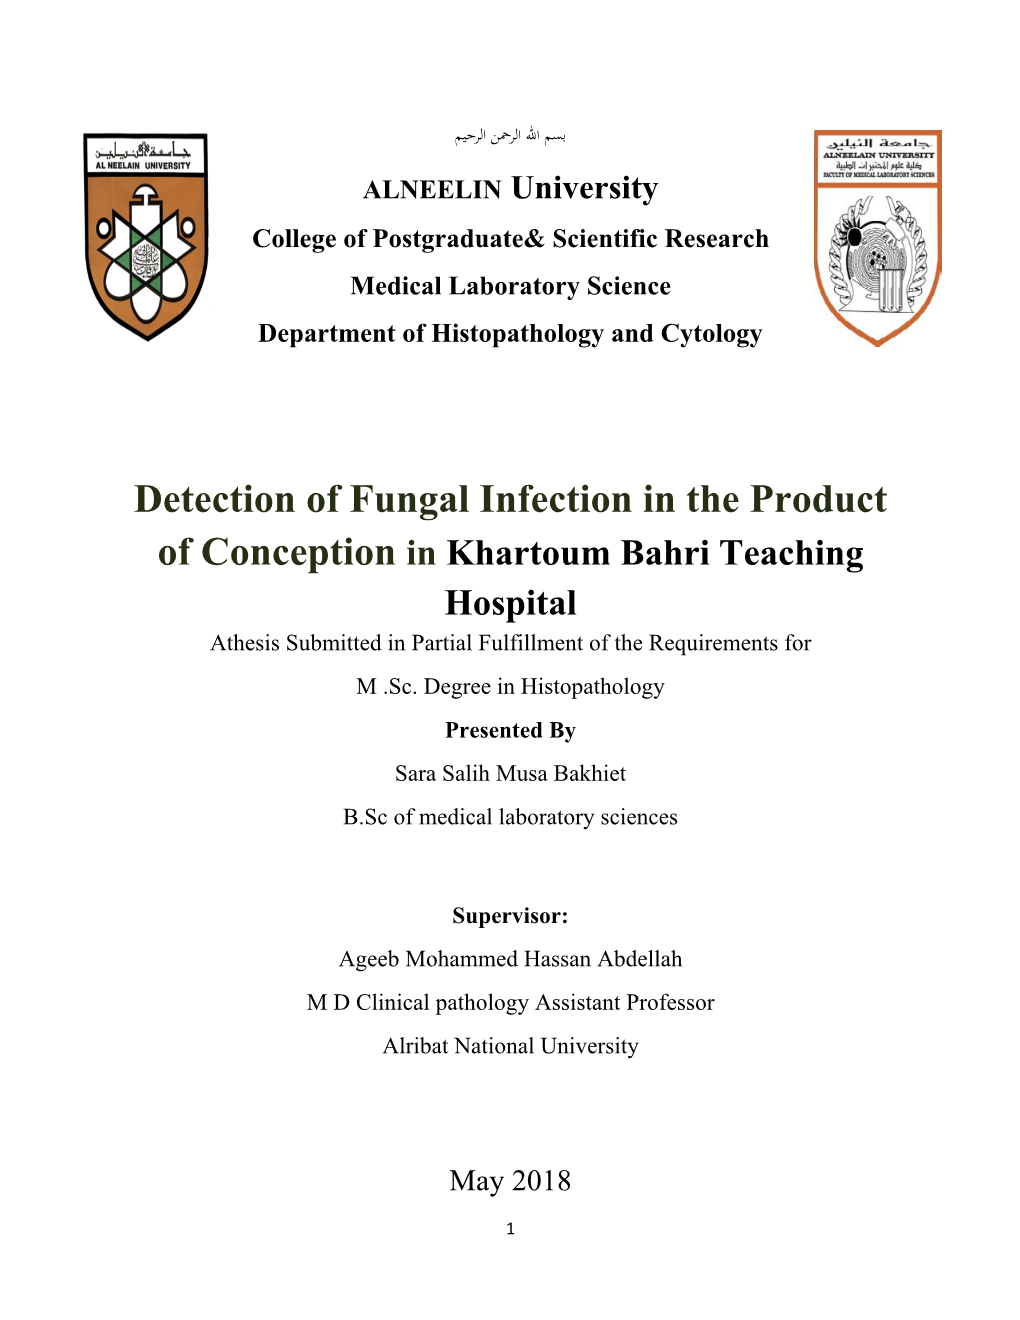 Detection of Fungal Infection in the Product of Conception in Khartoum Bahri Teaching Hospital Athesis Submitted in Partial Fulfillment of the Requirements for M .Sc